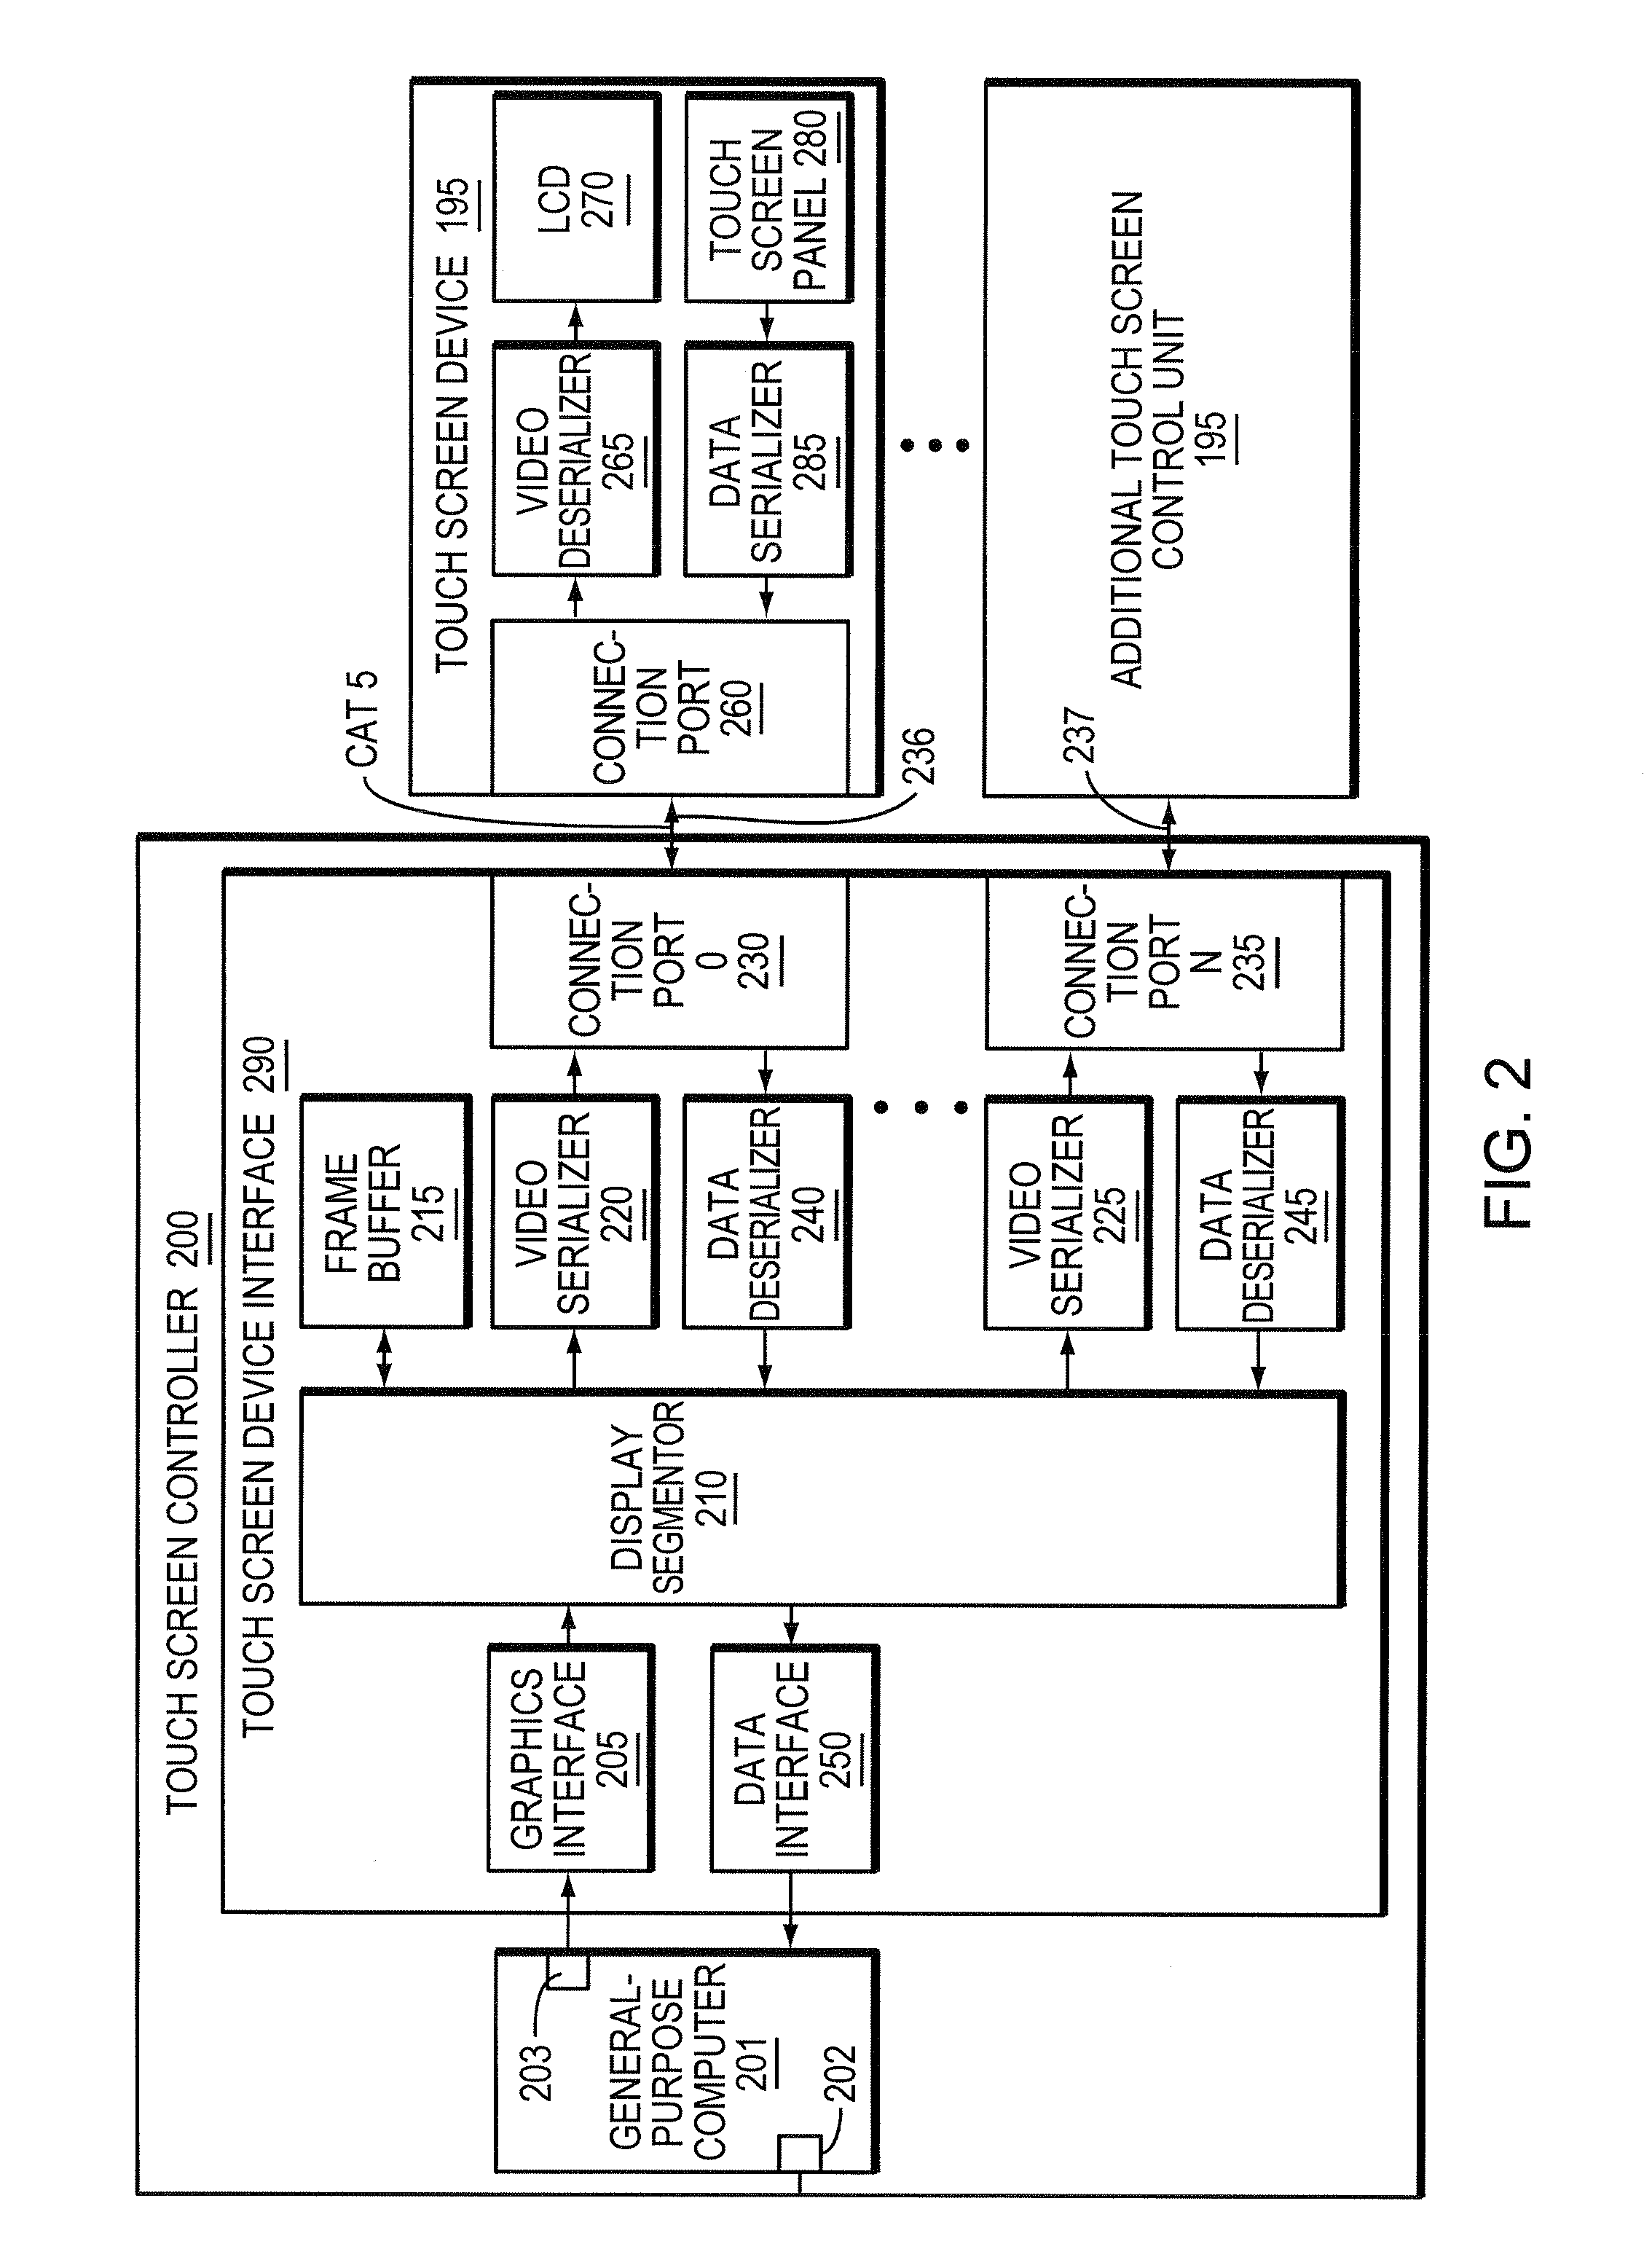 System and method for driving and receiving data from multiple touch screen devices